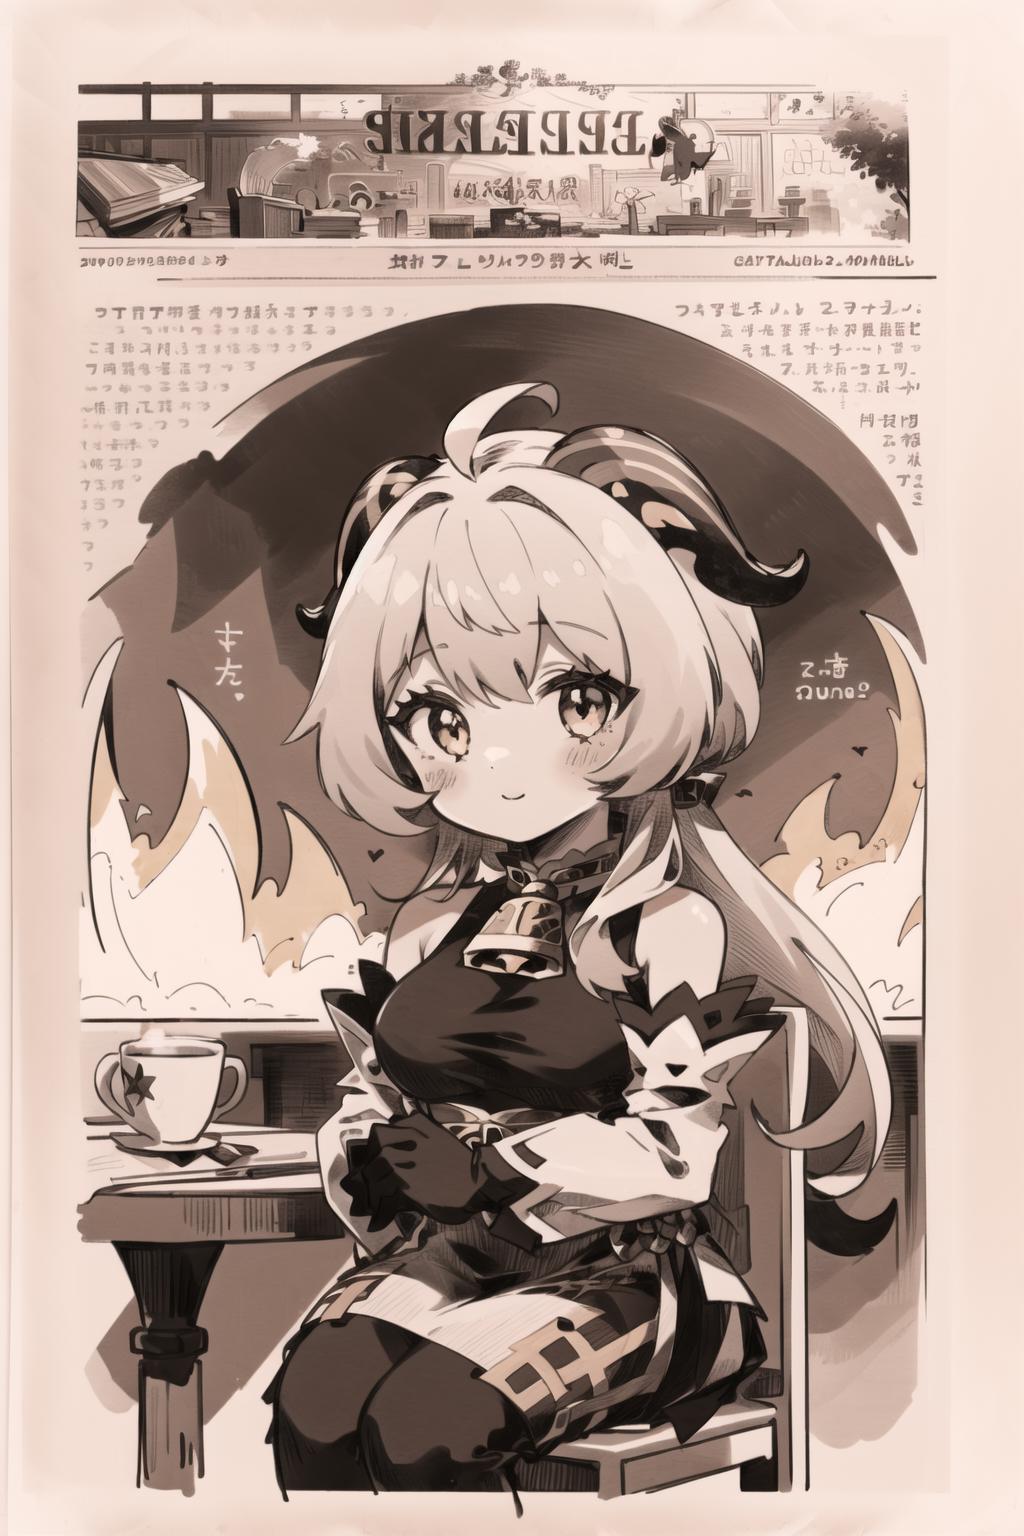 Anime character sitting at a table with a cup.